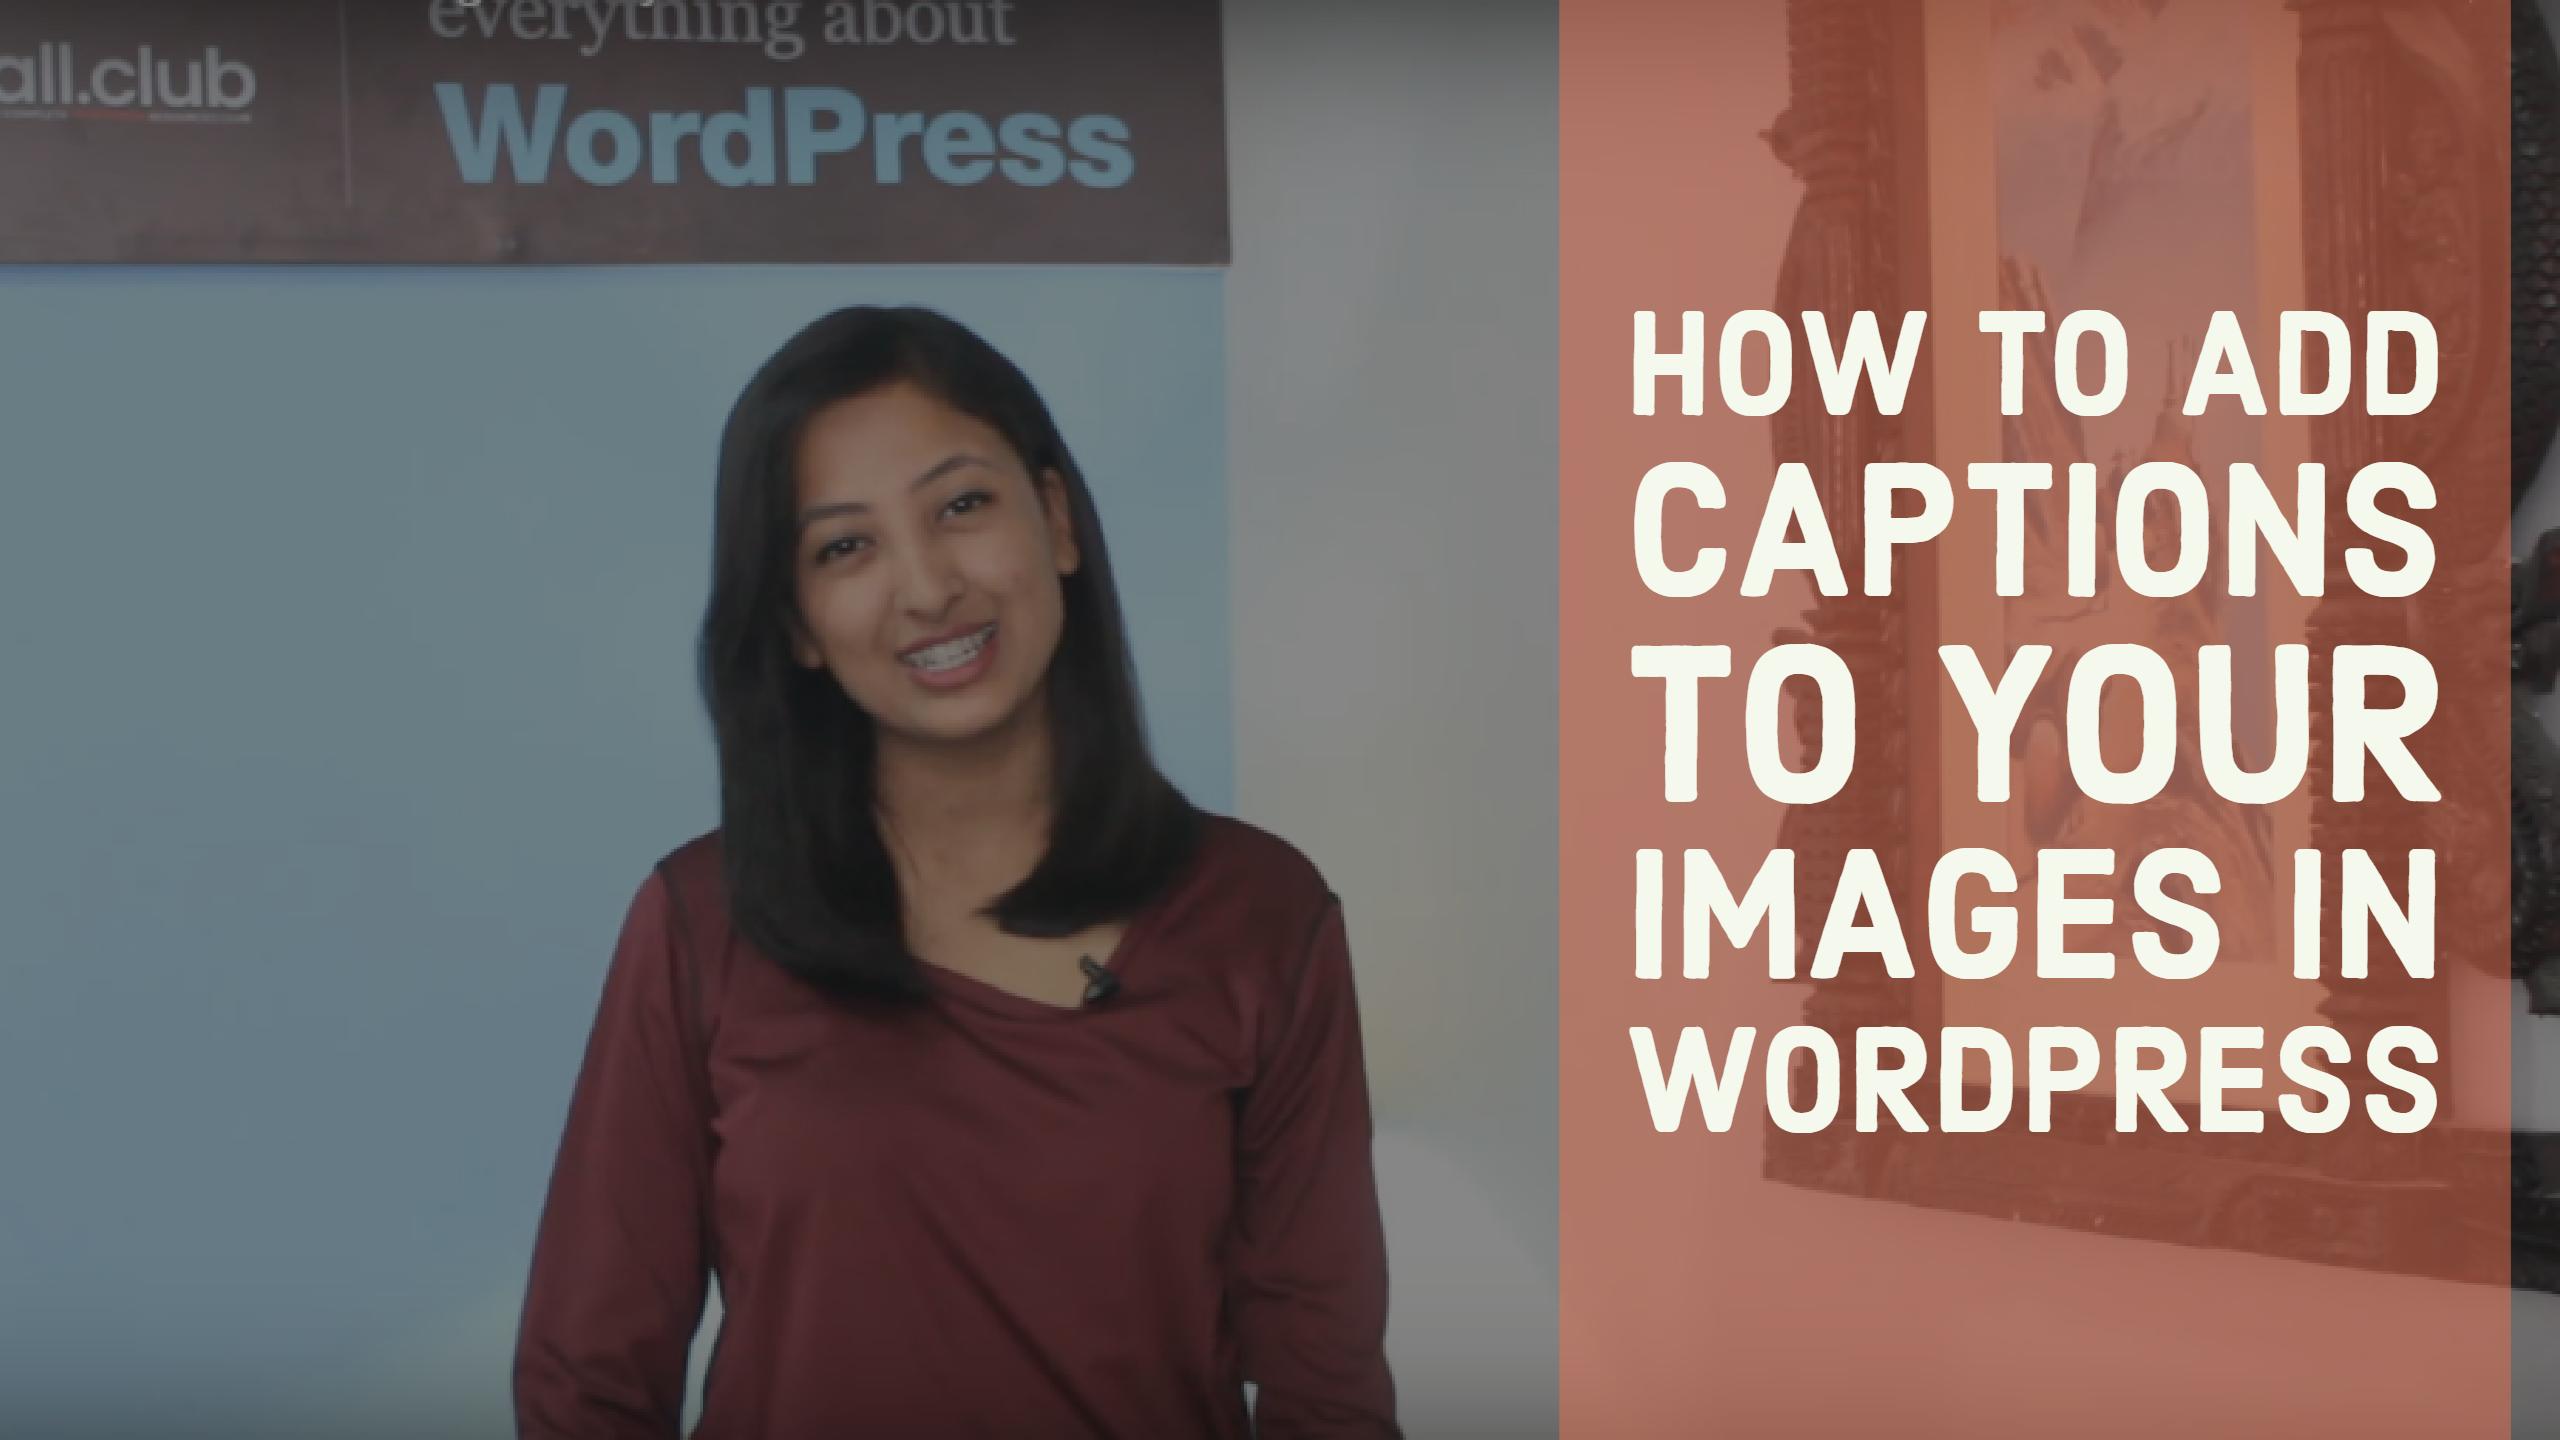 How to add captions to your images in WordPress